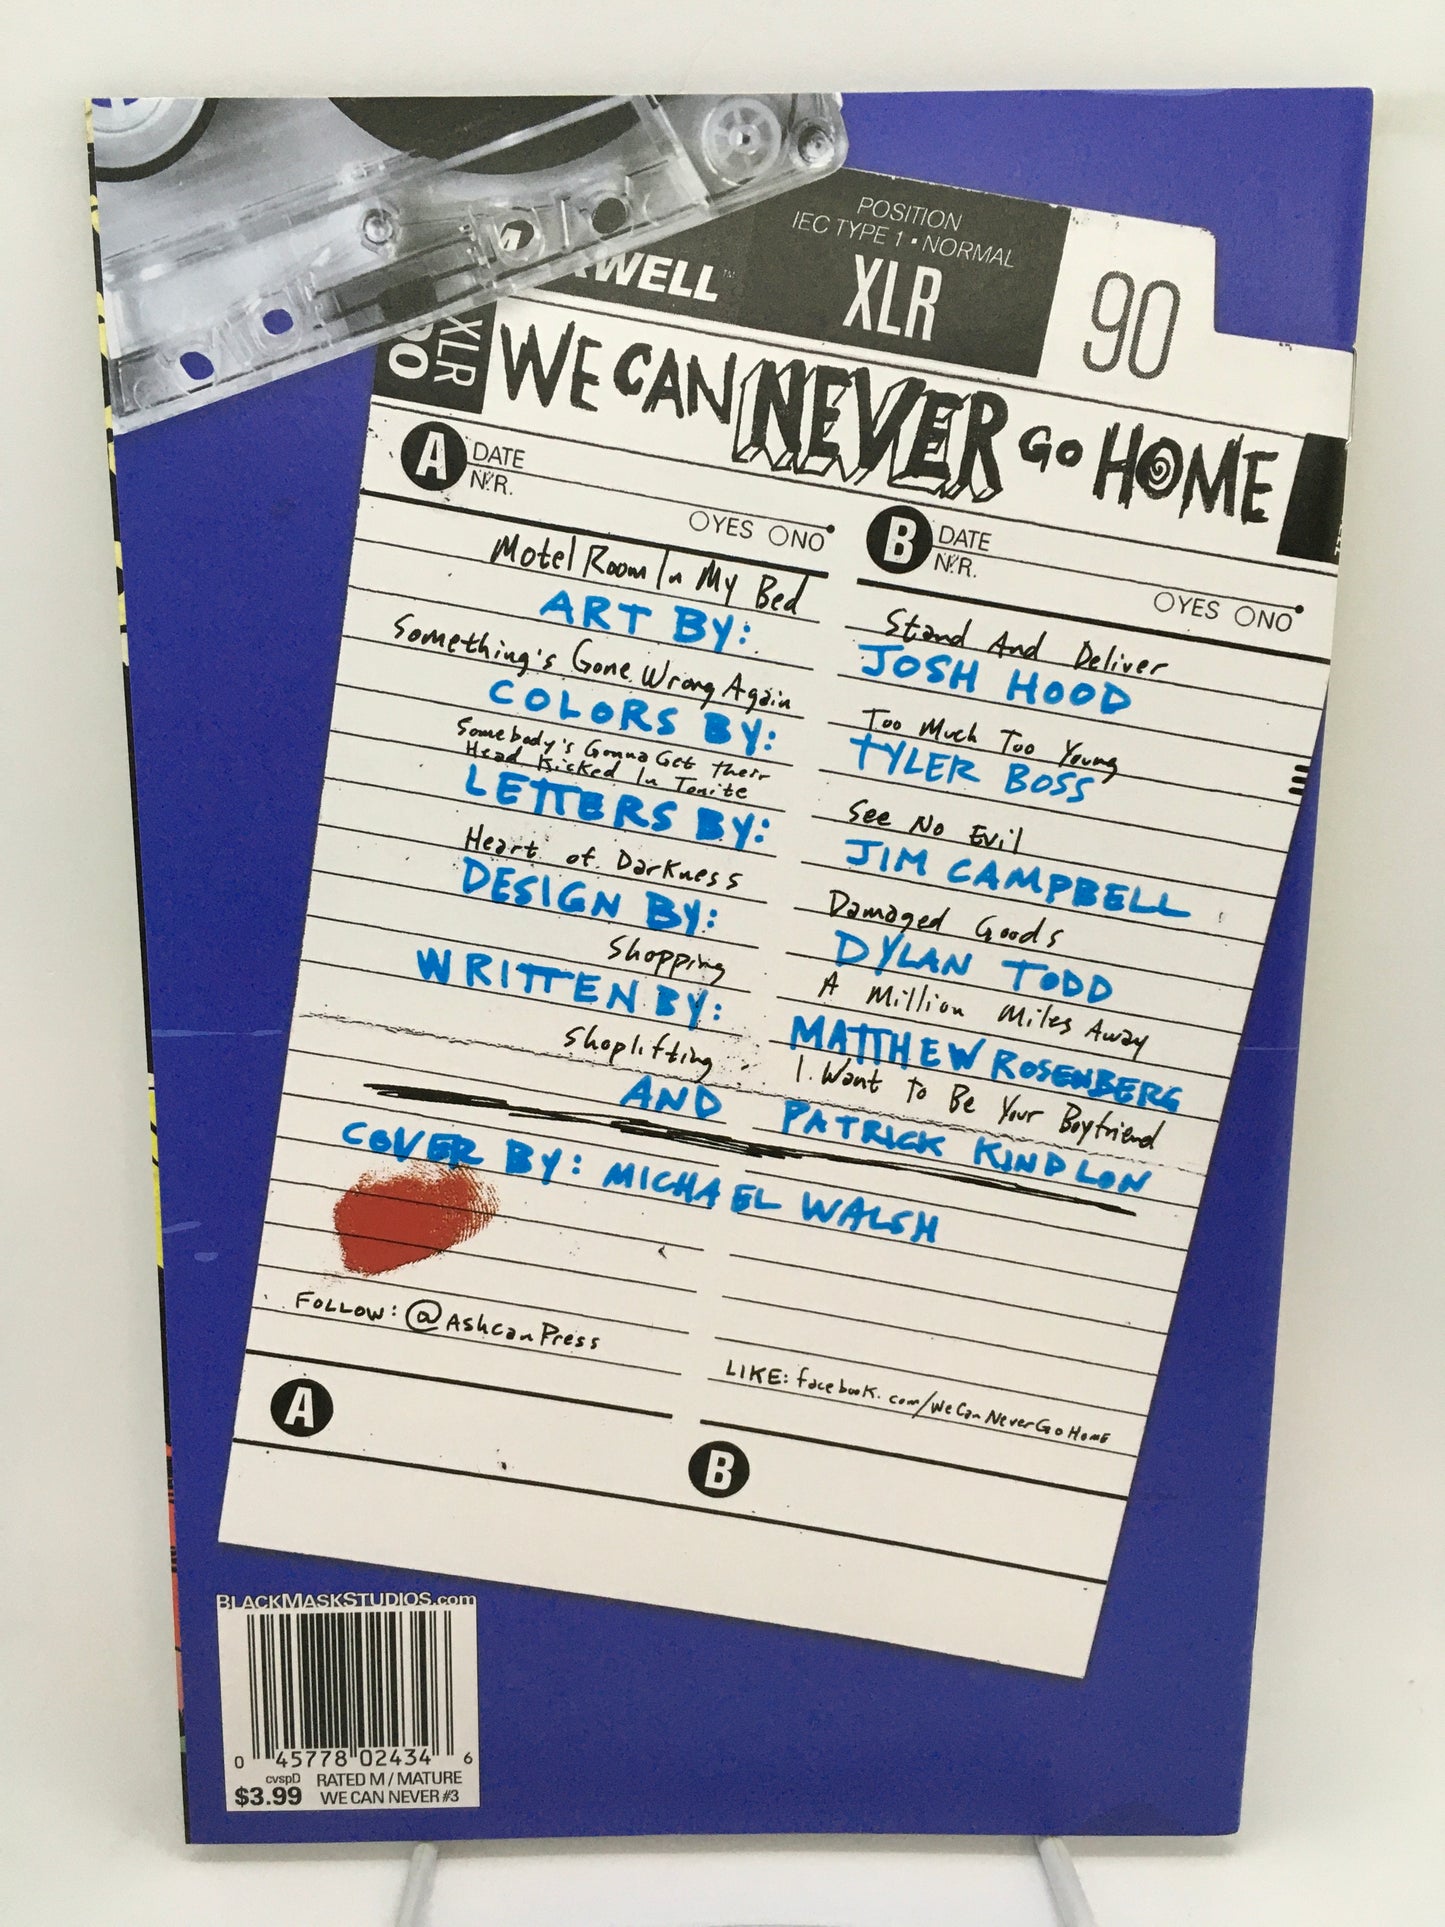 We Can Never Go Home (2015) #1, 2 & 3 Rick’s Comic City Store Variant Set